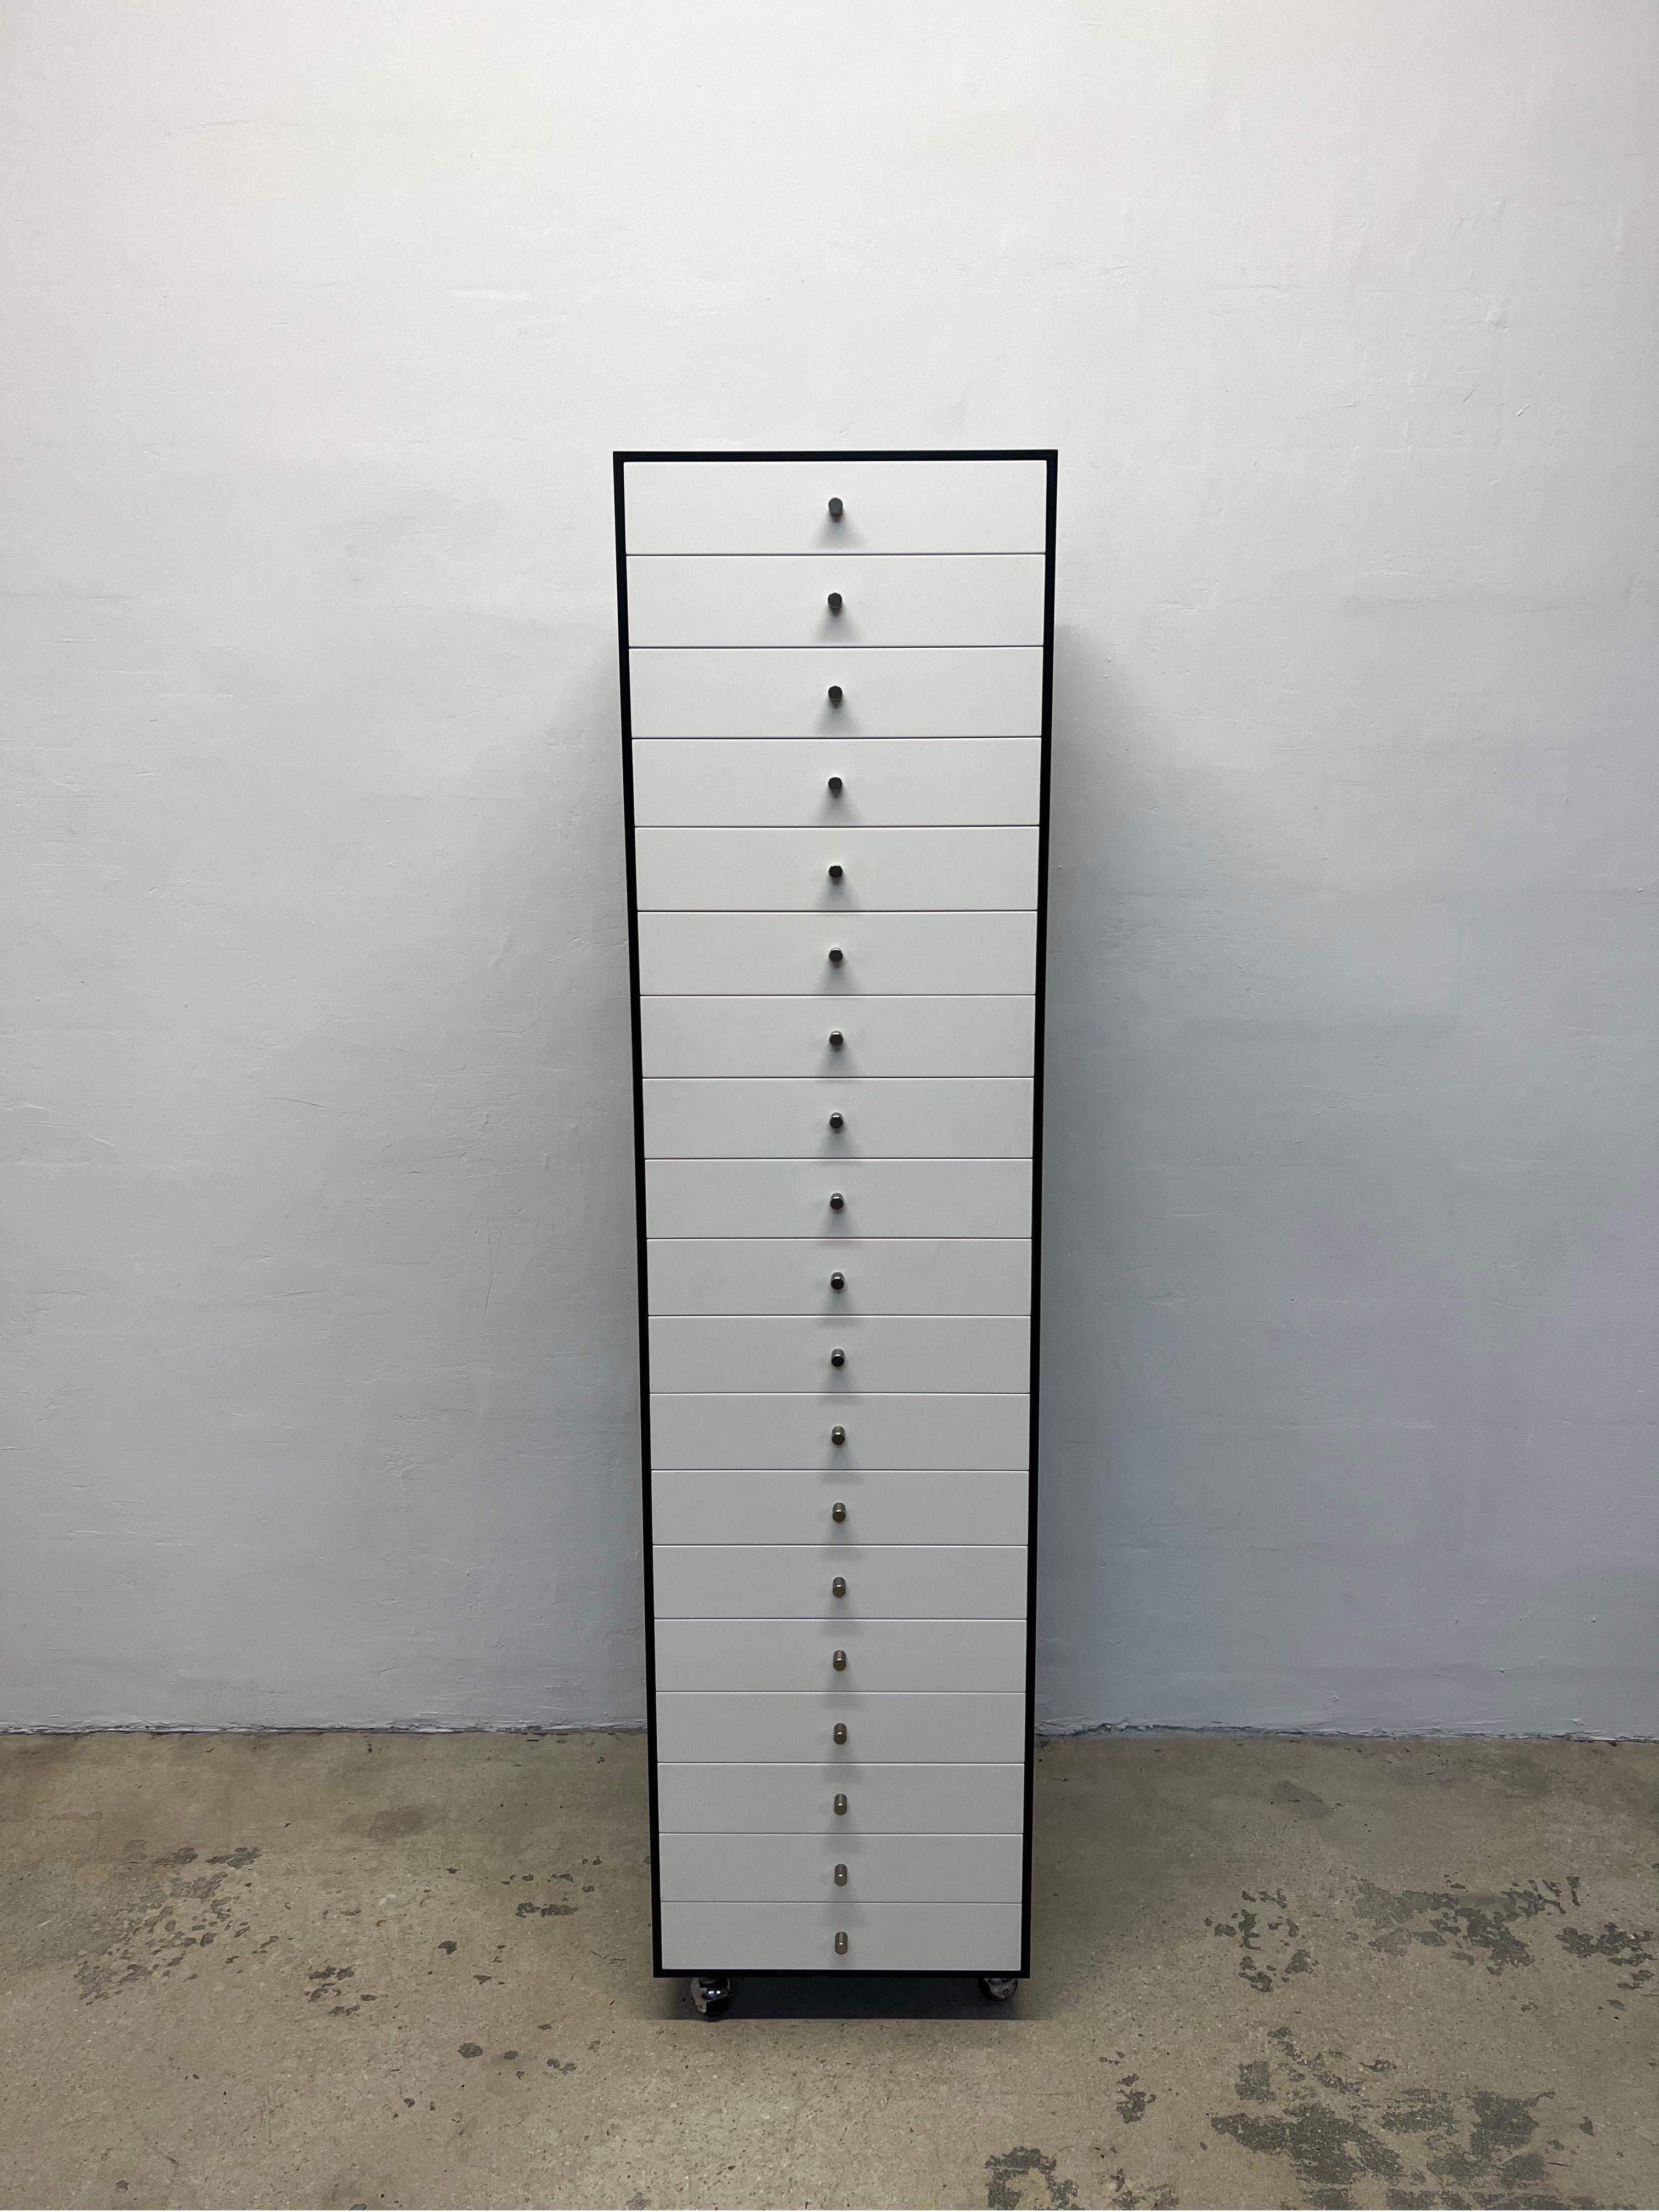 This rare 19 drawer cabinet by the renowned Japanese designer Shiro Kuramata is a true masterpiece of contemporary furniture design. Crafted with exquisite attention to detail, the cabinet features 19 spacious white laminate drawers housed within a